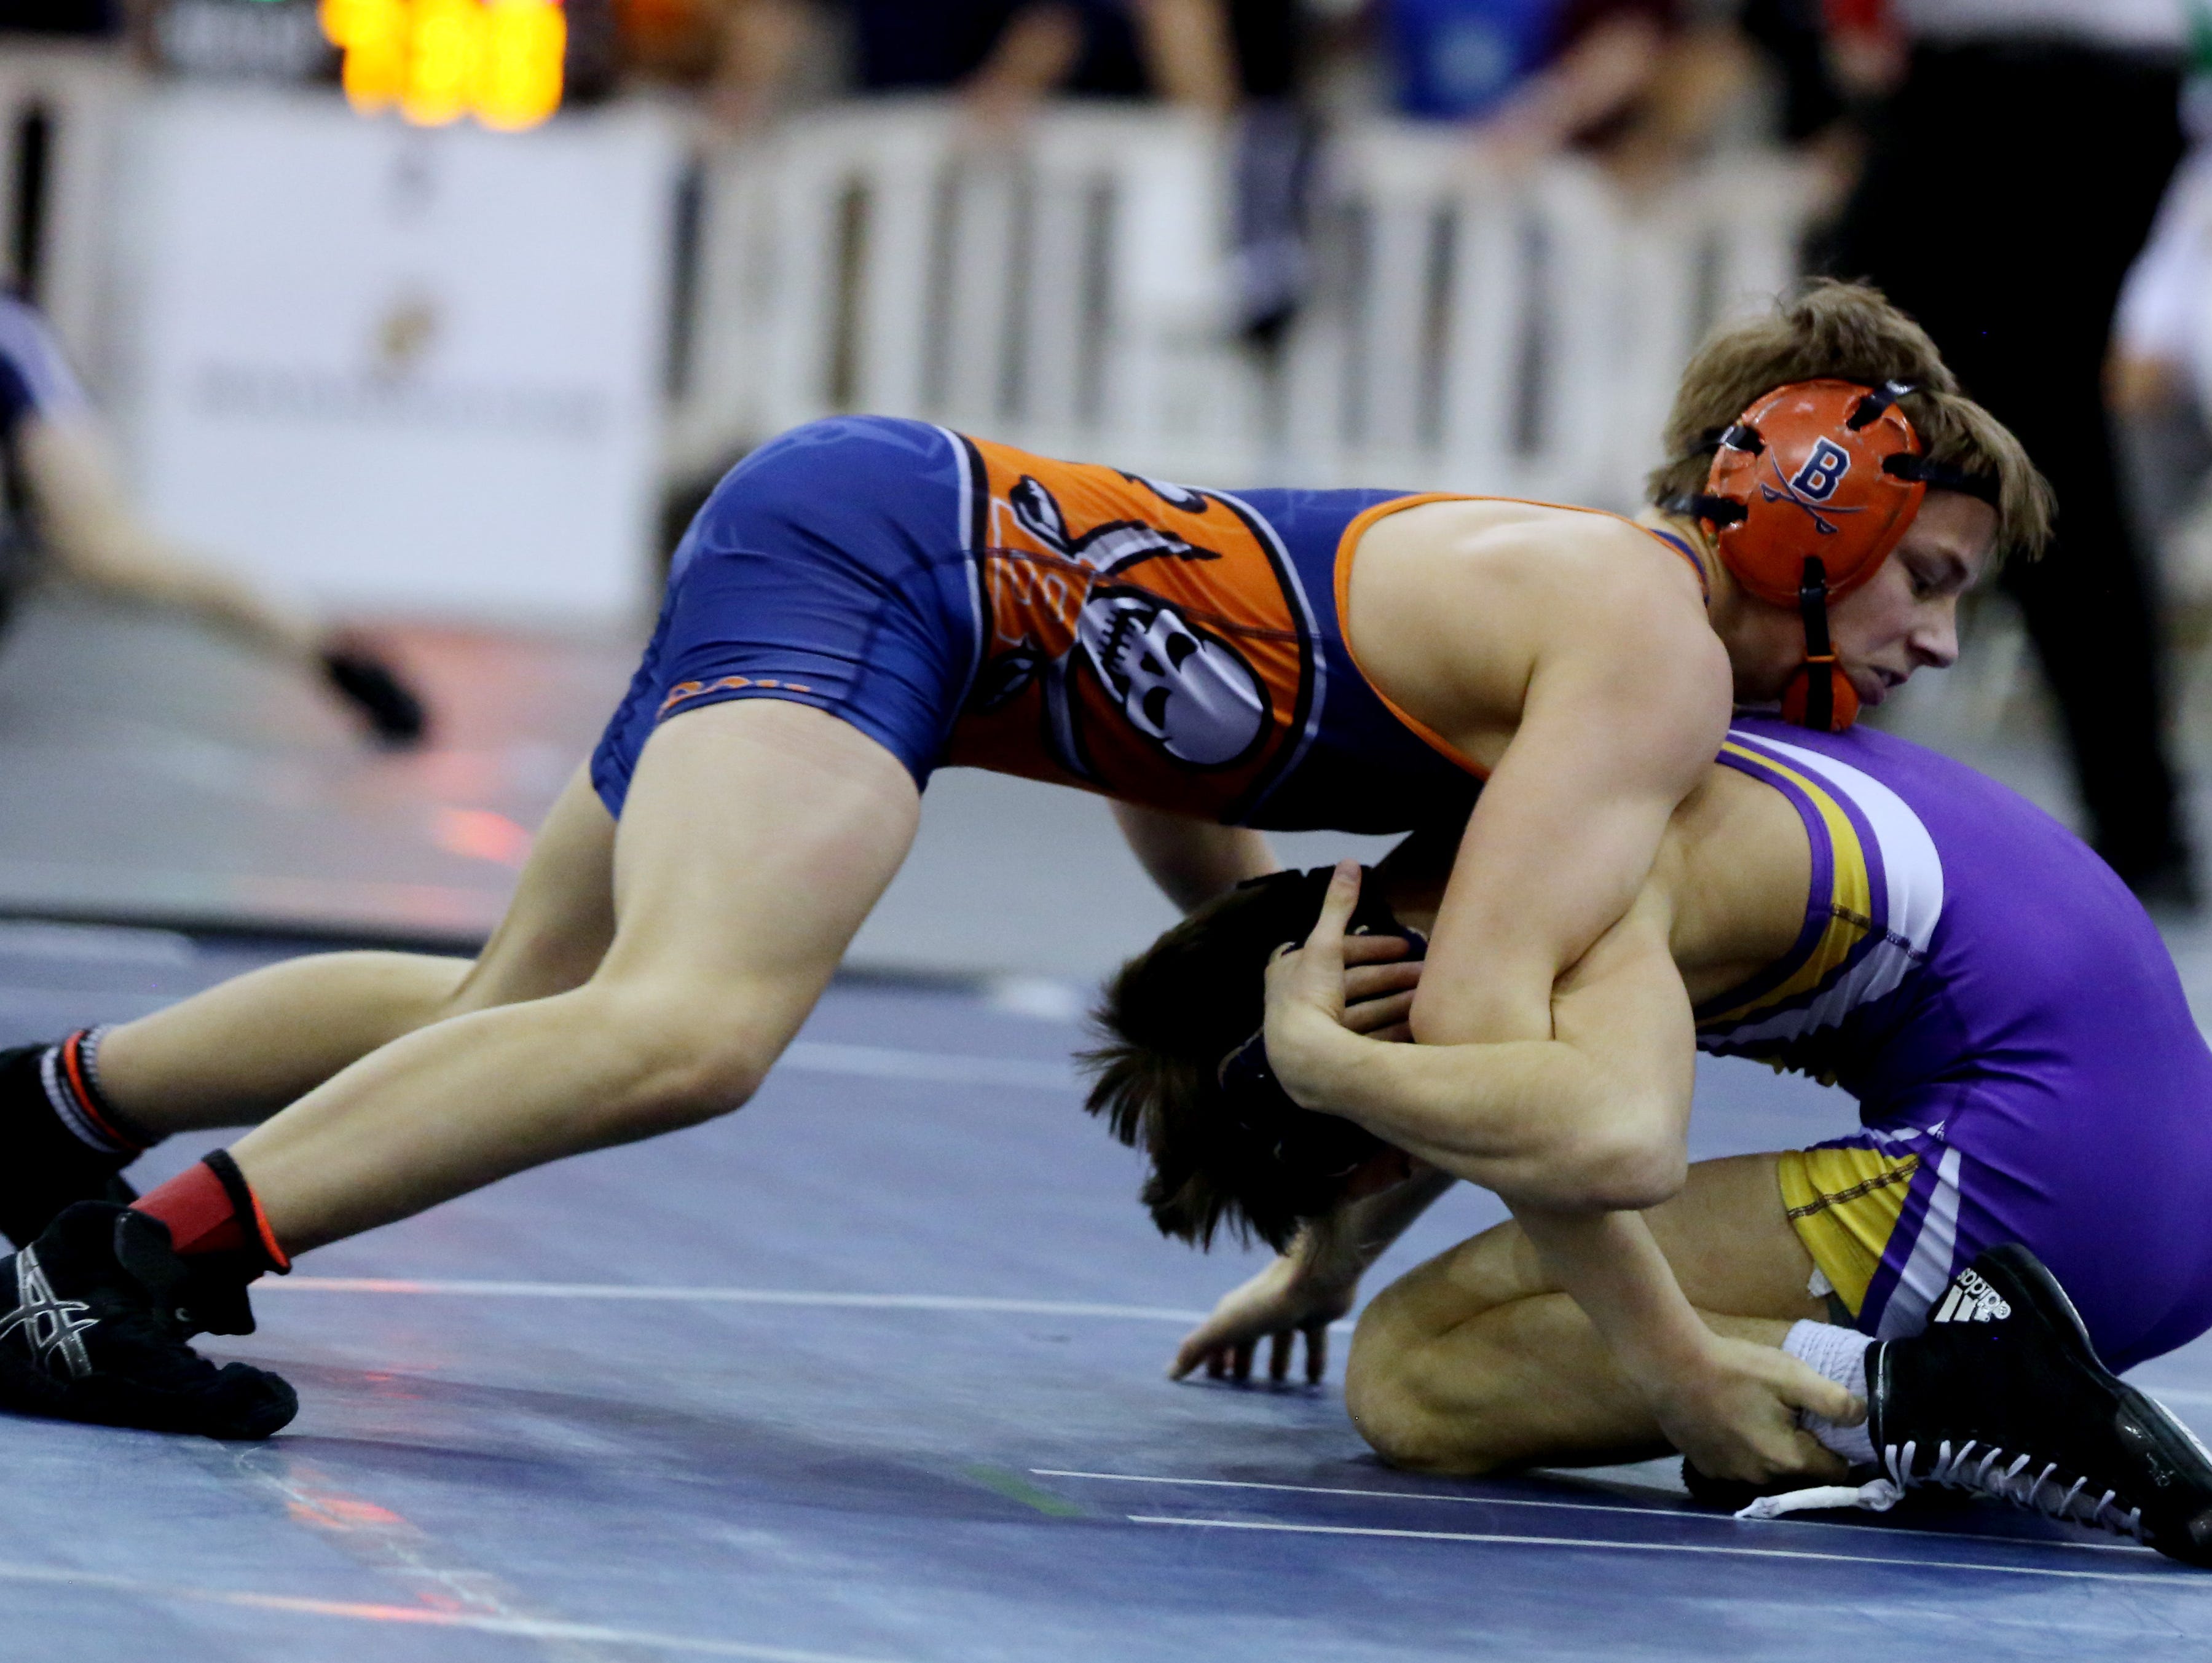 Beech High School's Brayden Palmer, left in blue and orange, competes with Lawrence County's Luke Dezember in the 106-pound semifinals at the TSSAA State Wrestling Tournament Friday.